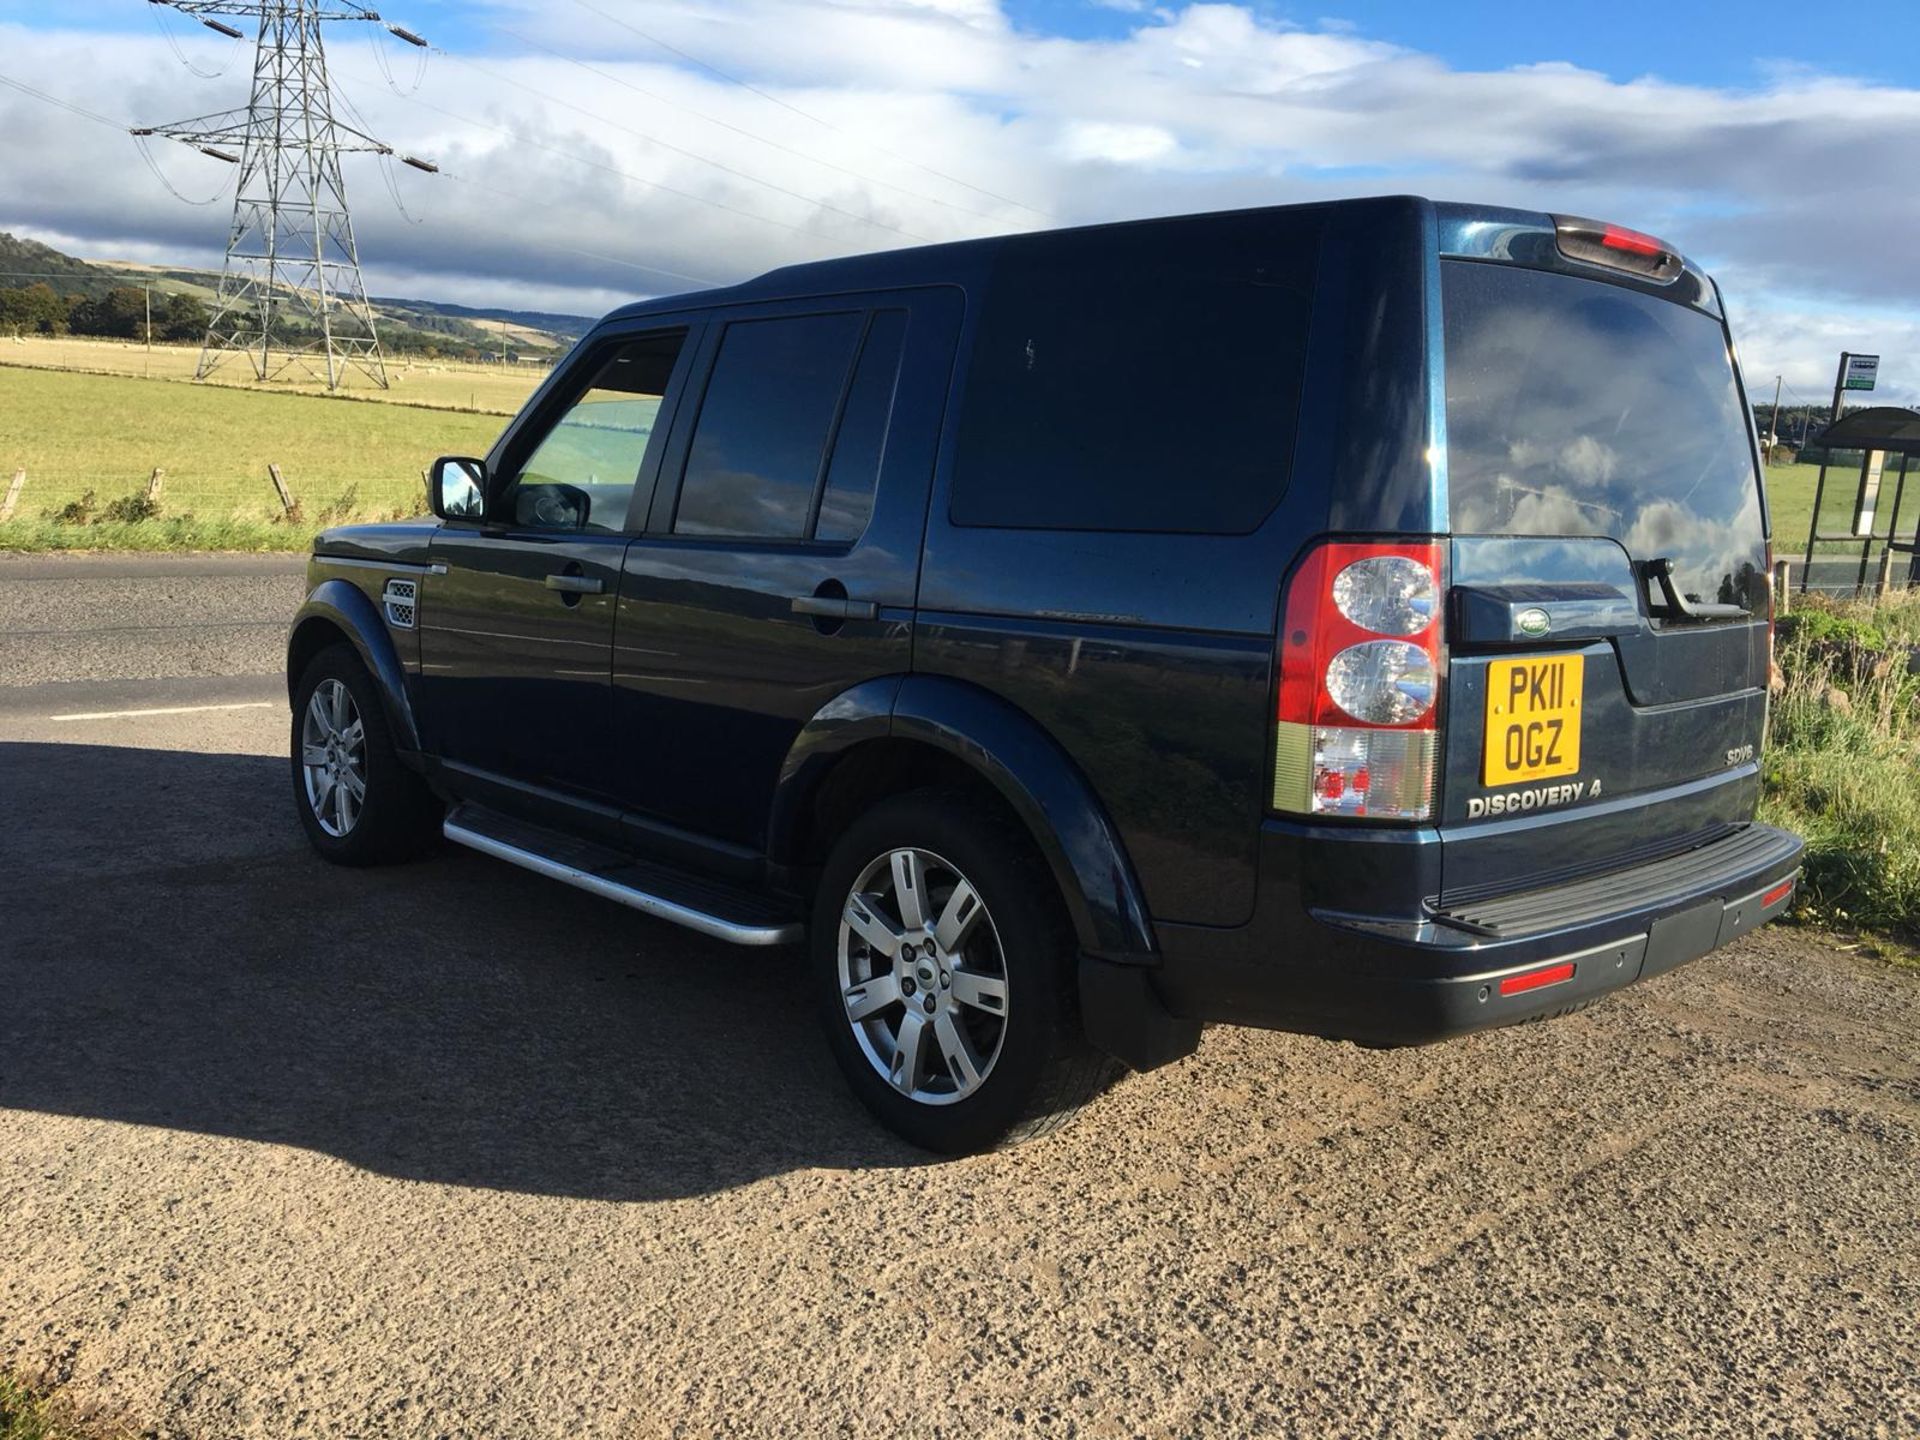 2011/11 REG LAND ROVER DISCOVERY SDV6 AUTOMATIC 245 COMMERCIAL DIESEL 4X4, SHOWING 1 FORMER KEEPER - Image 4 of 9